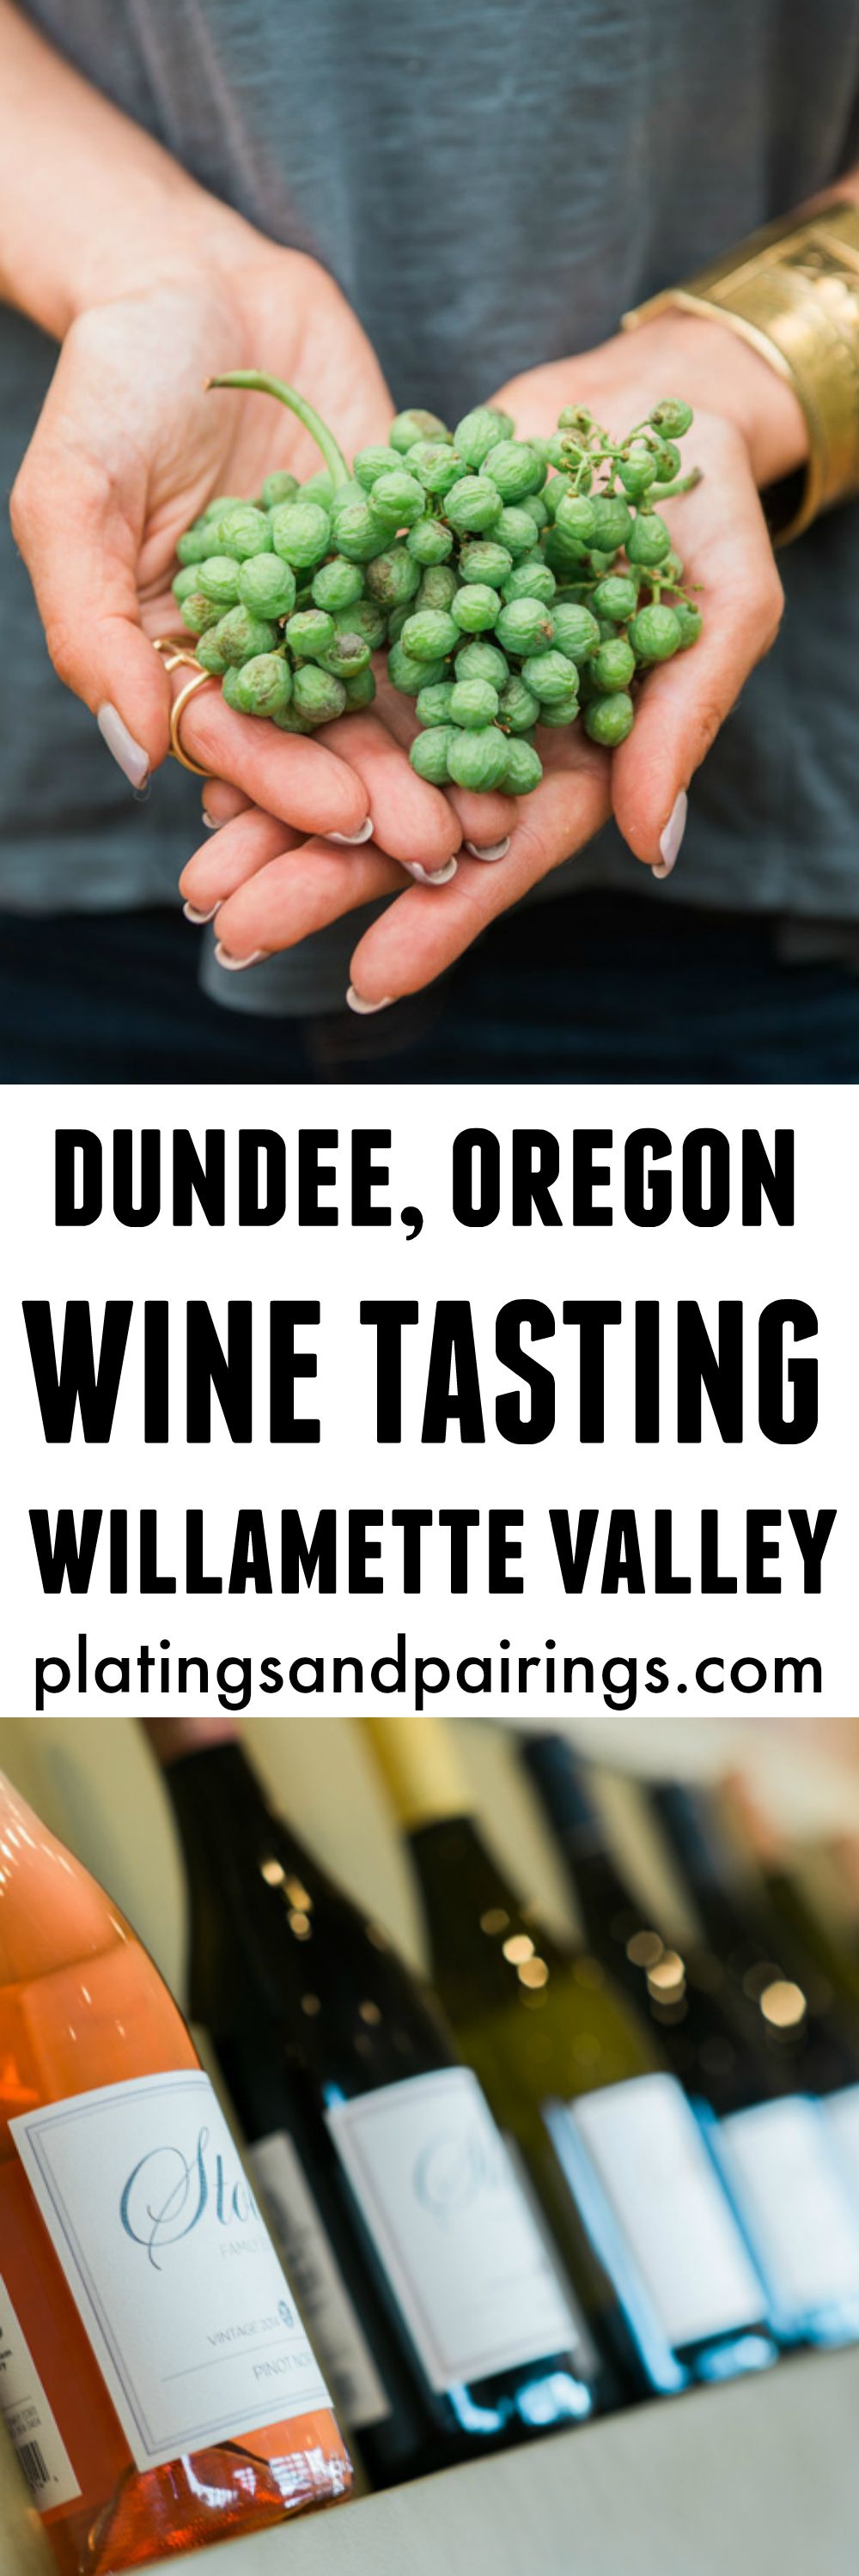 The Best Wineries to Visit in the Willamette Valley - Dundee, Oregon | platingsandpairings.com